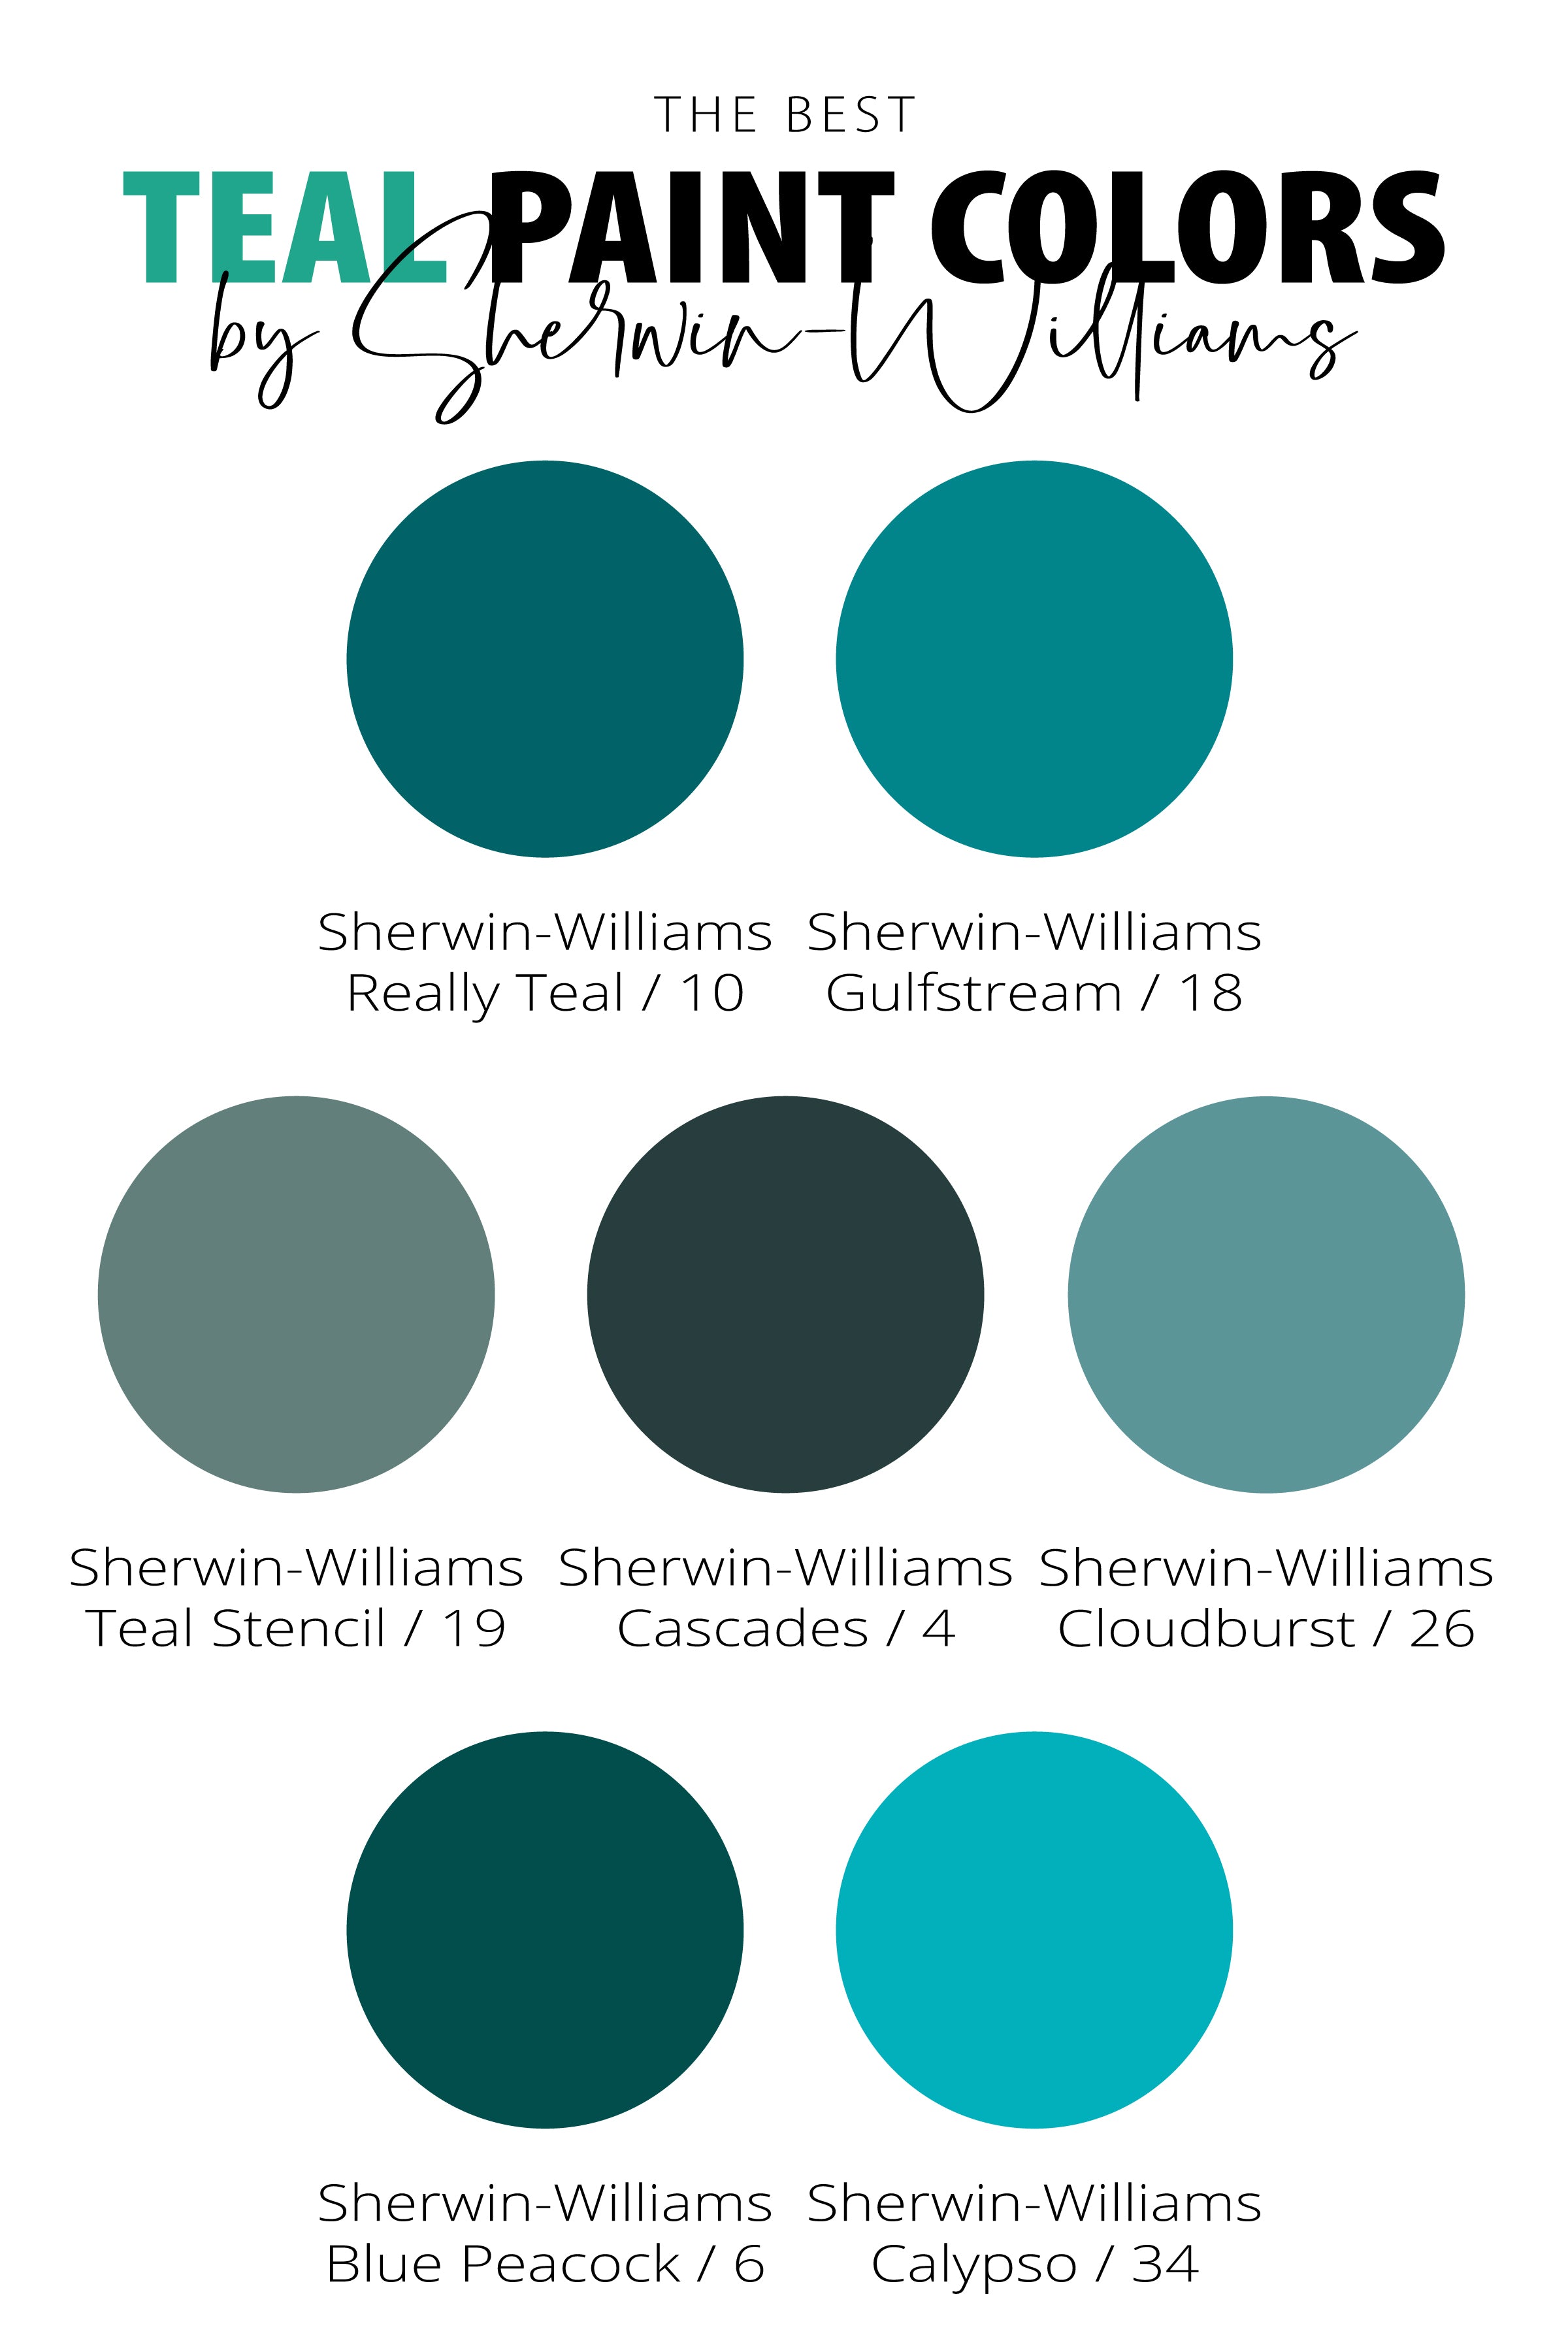 75+ Best Shades of Green Paint Colors (Color Codes, LRV, Light & Dark –  CreativeBooster